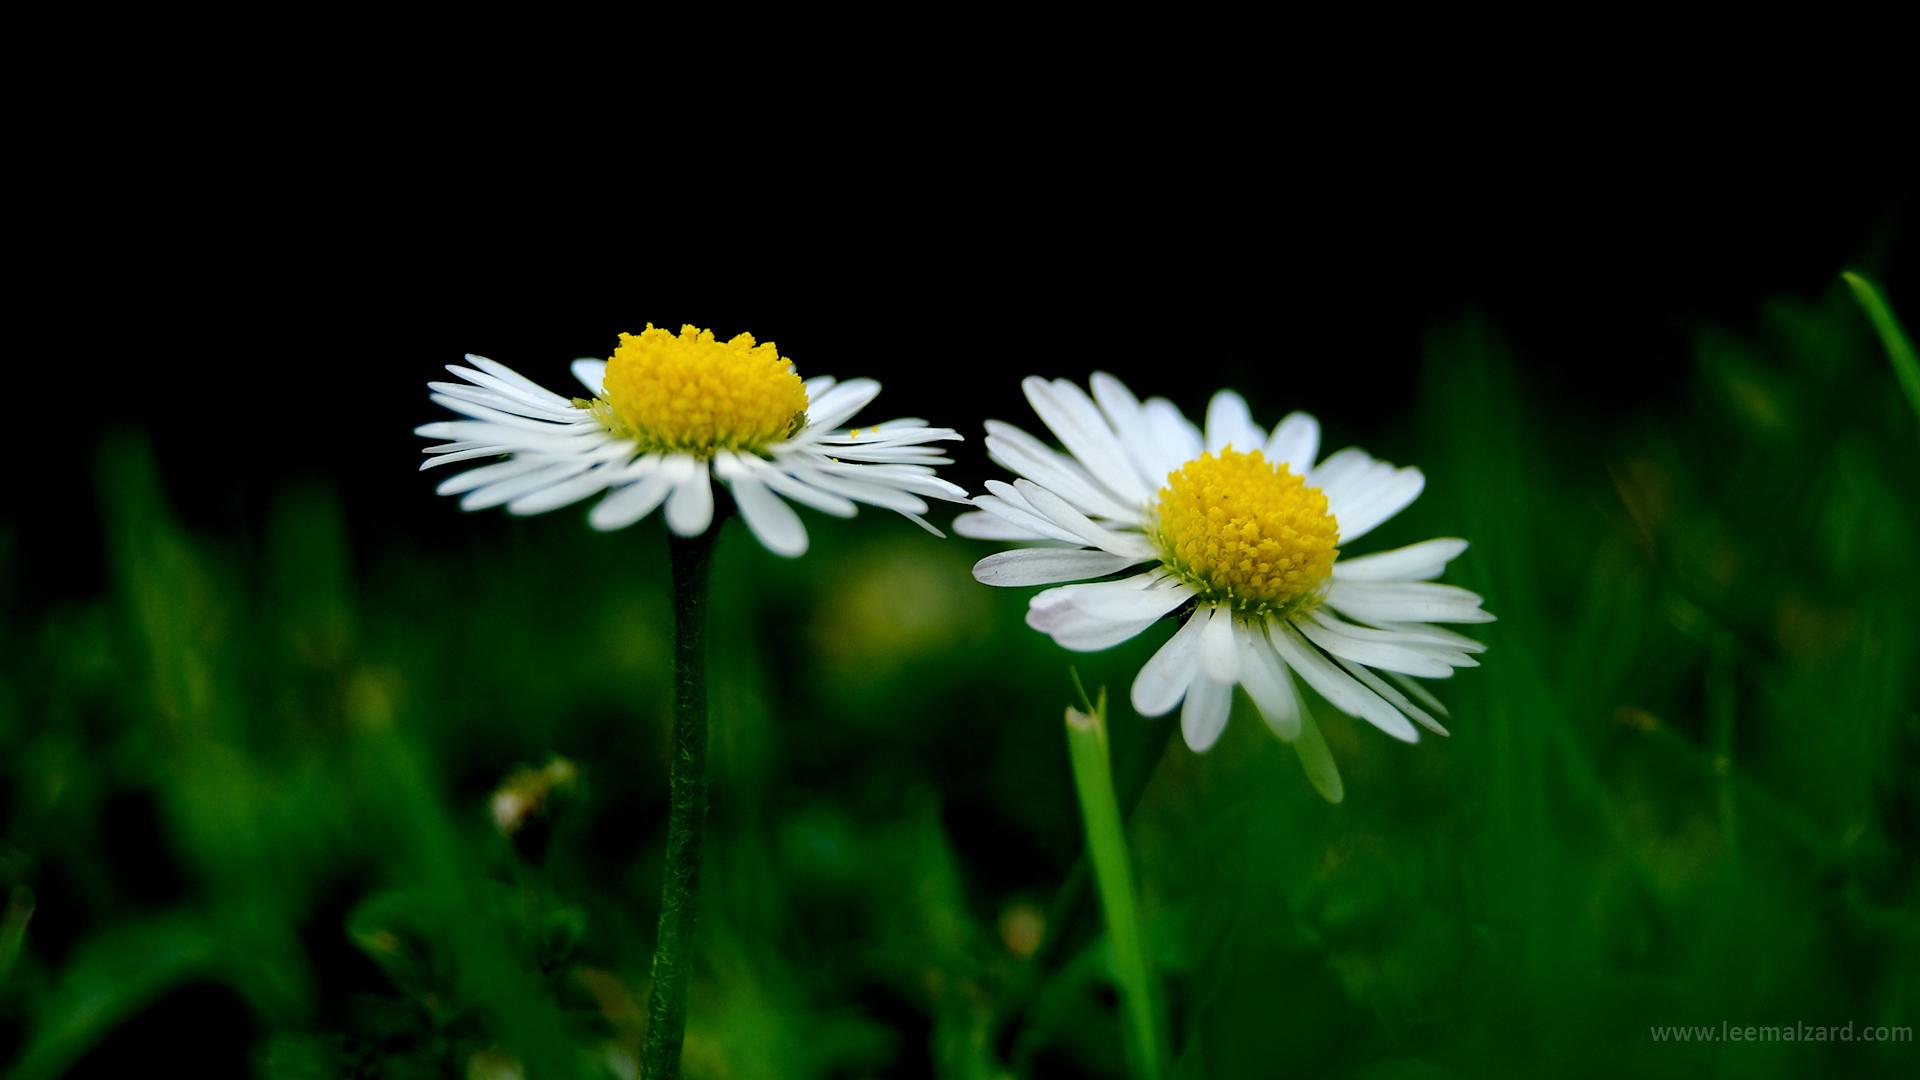 Cute Cheerful Pair Flowers - Nature Image Hd Cute , HD Wallpaper & Backgrounds